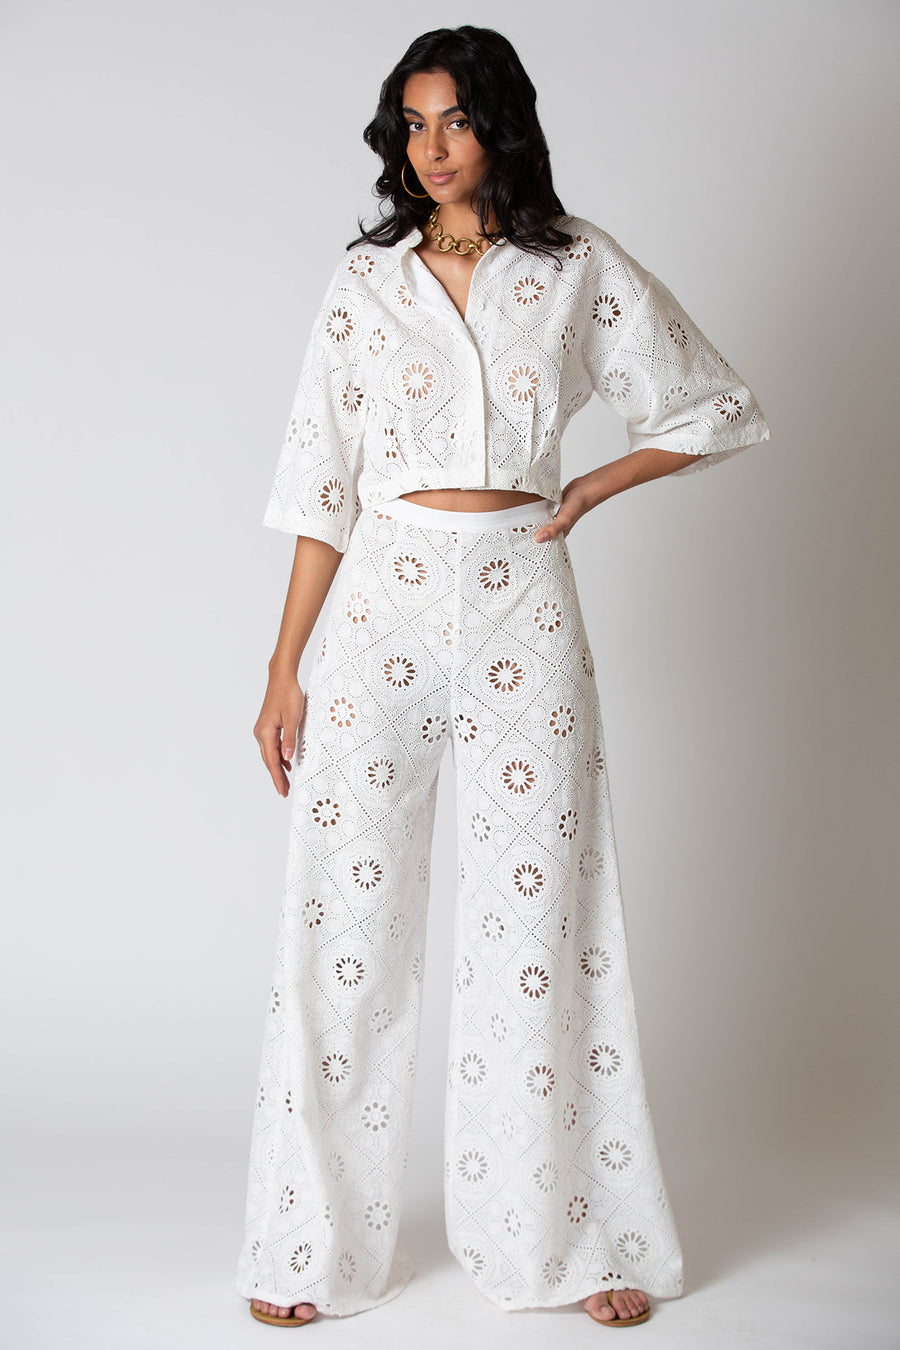 This is a photo of a woman posing in matching, white embroidered top and pants.